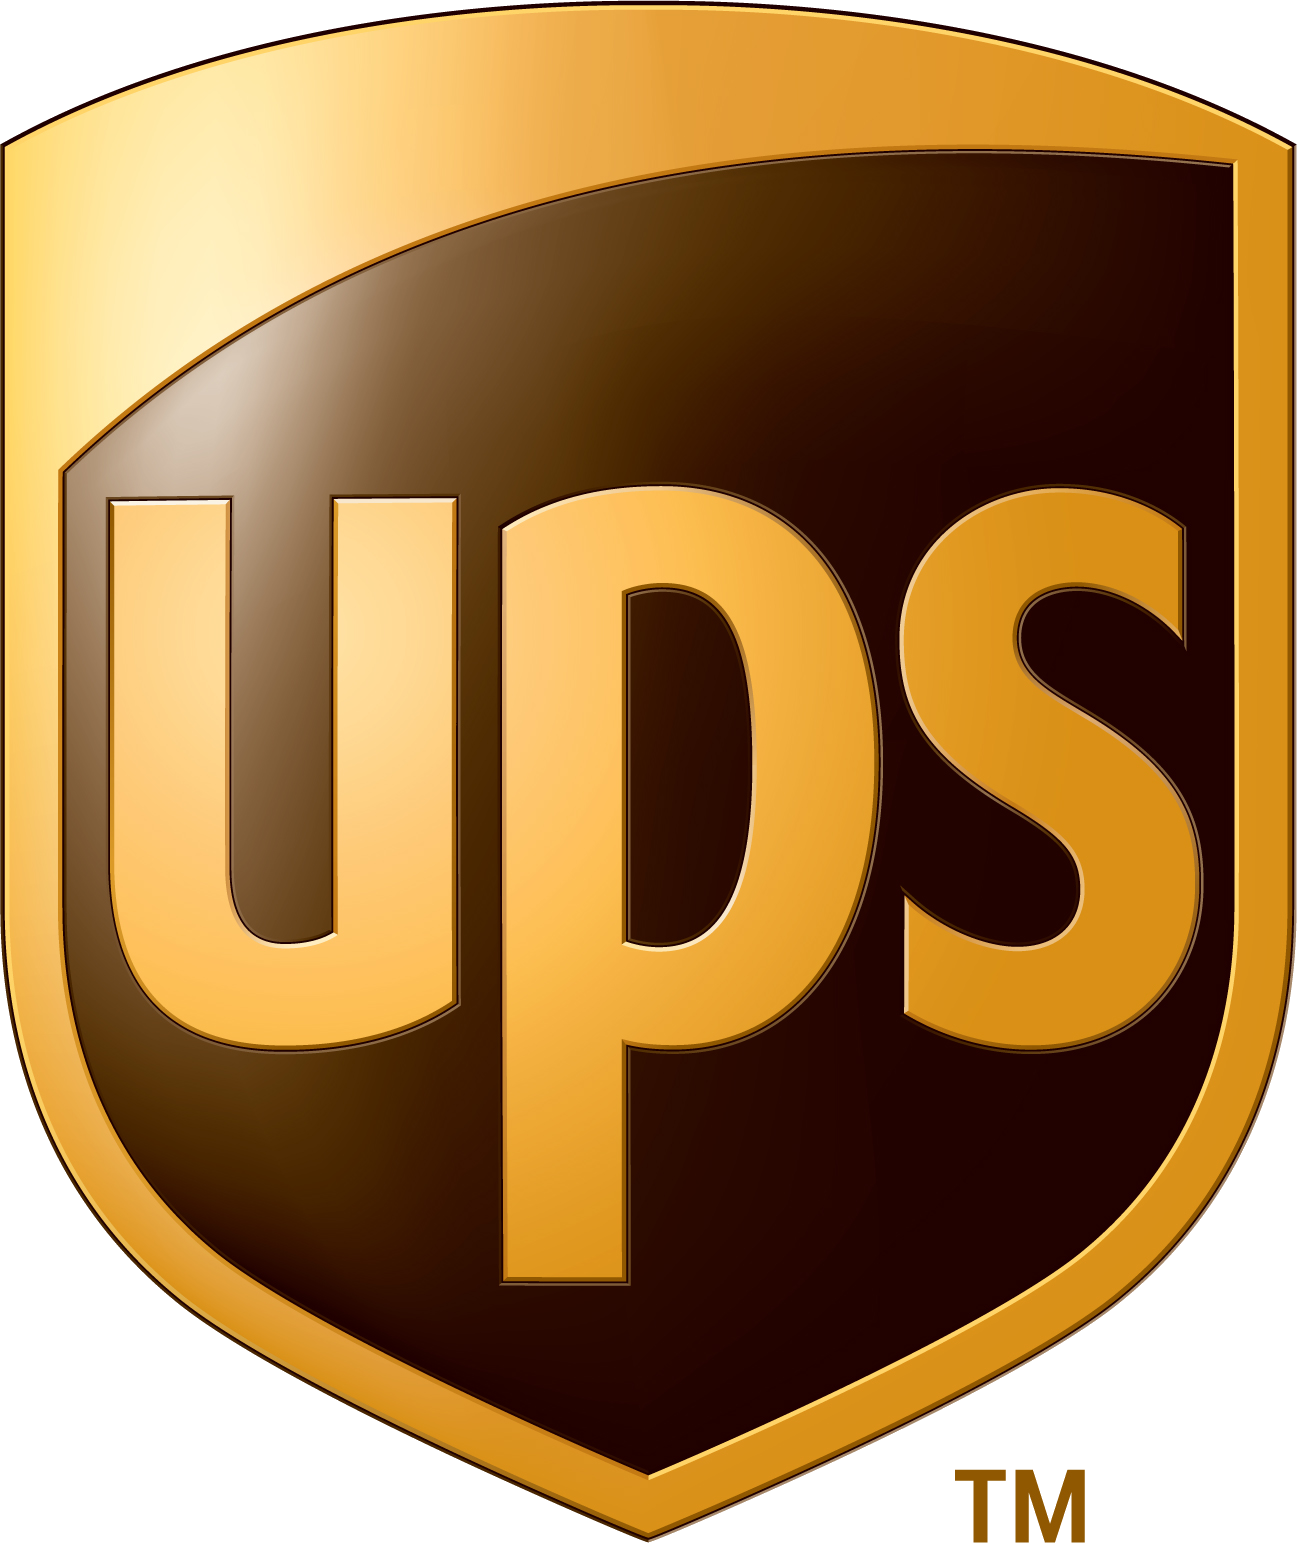 ups-will-hire-over-90-000-seasonal-workers-for-holiday-delivery-surge